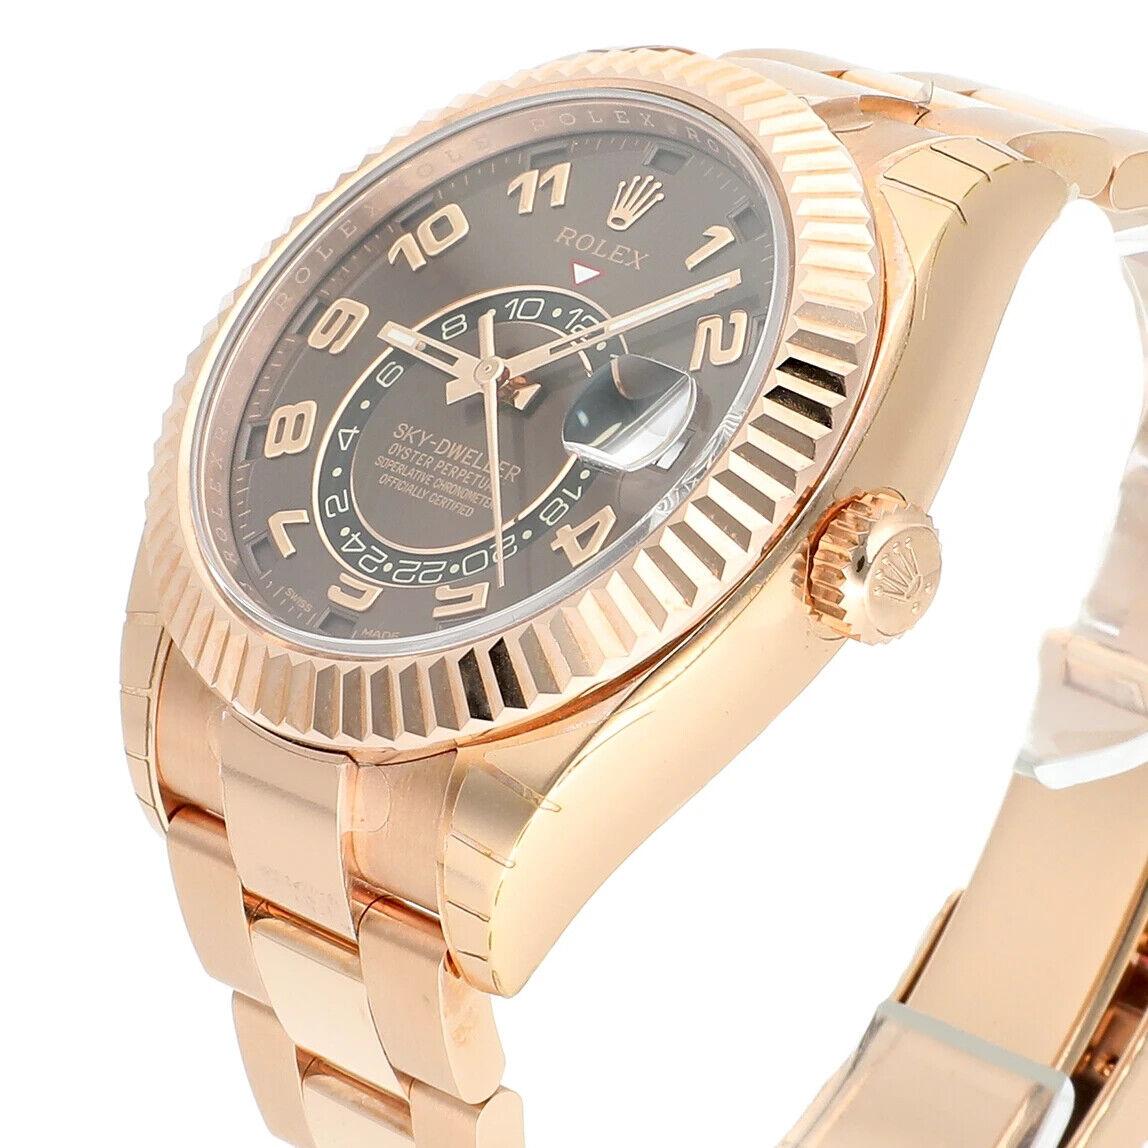 18kt everose gold case with a 18kt everose gold Rolex oyster bracelet. Bi-directional rotating 18kt everose gold bezel. Chocolate dial with rose gold-tone hands and Arabic numeral hour markers. Minute markers around the outer rim. Dial Type: Analog.